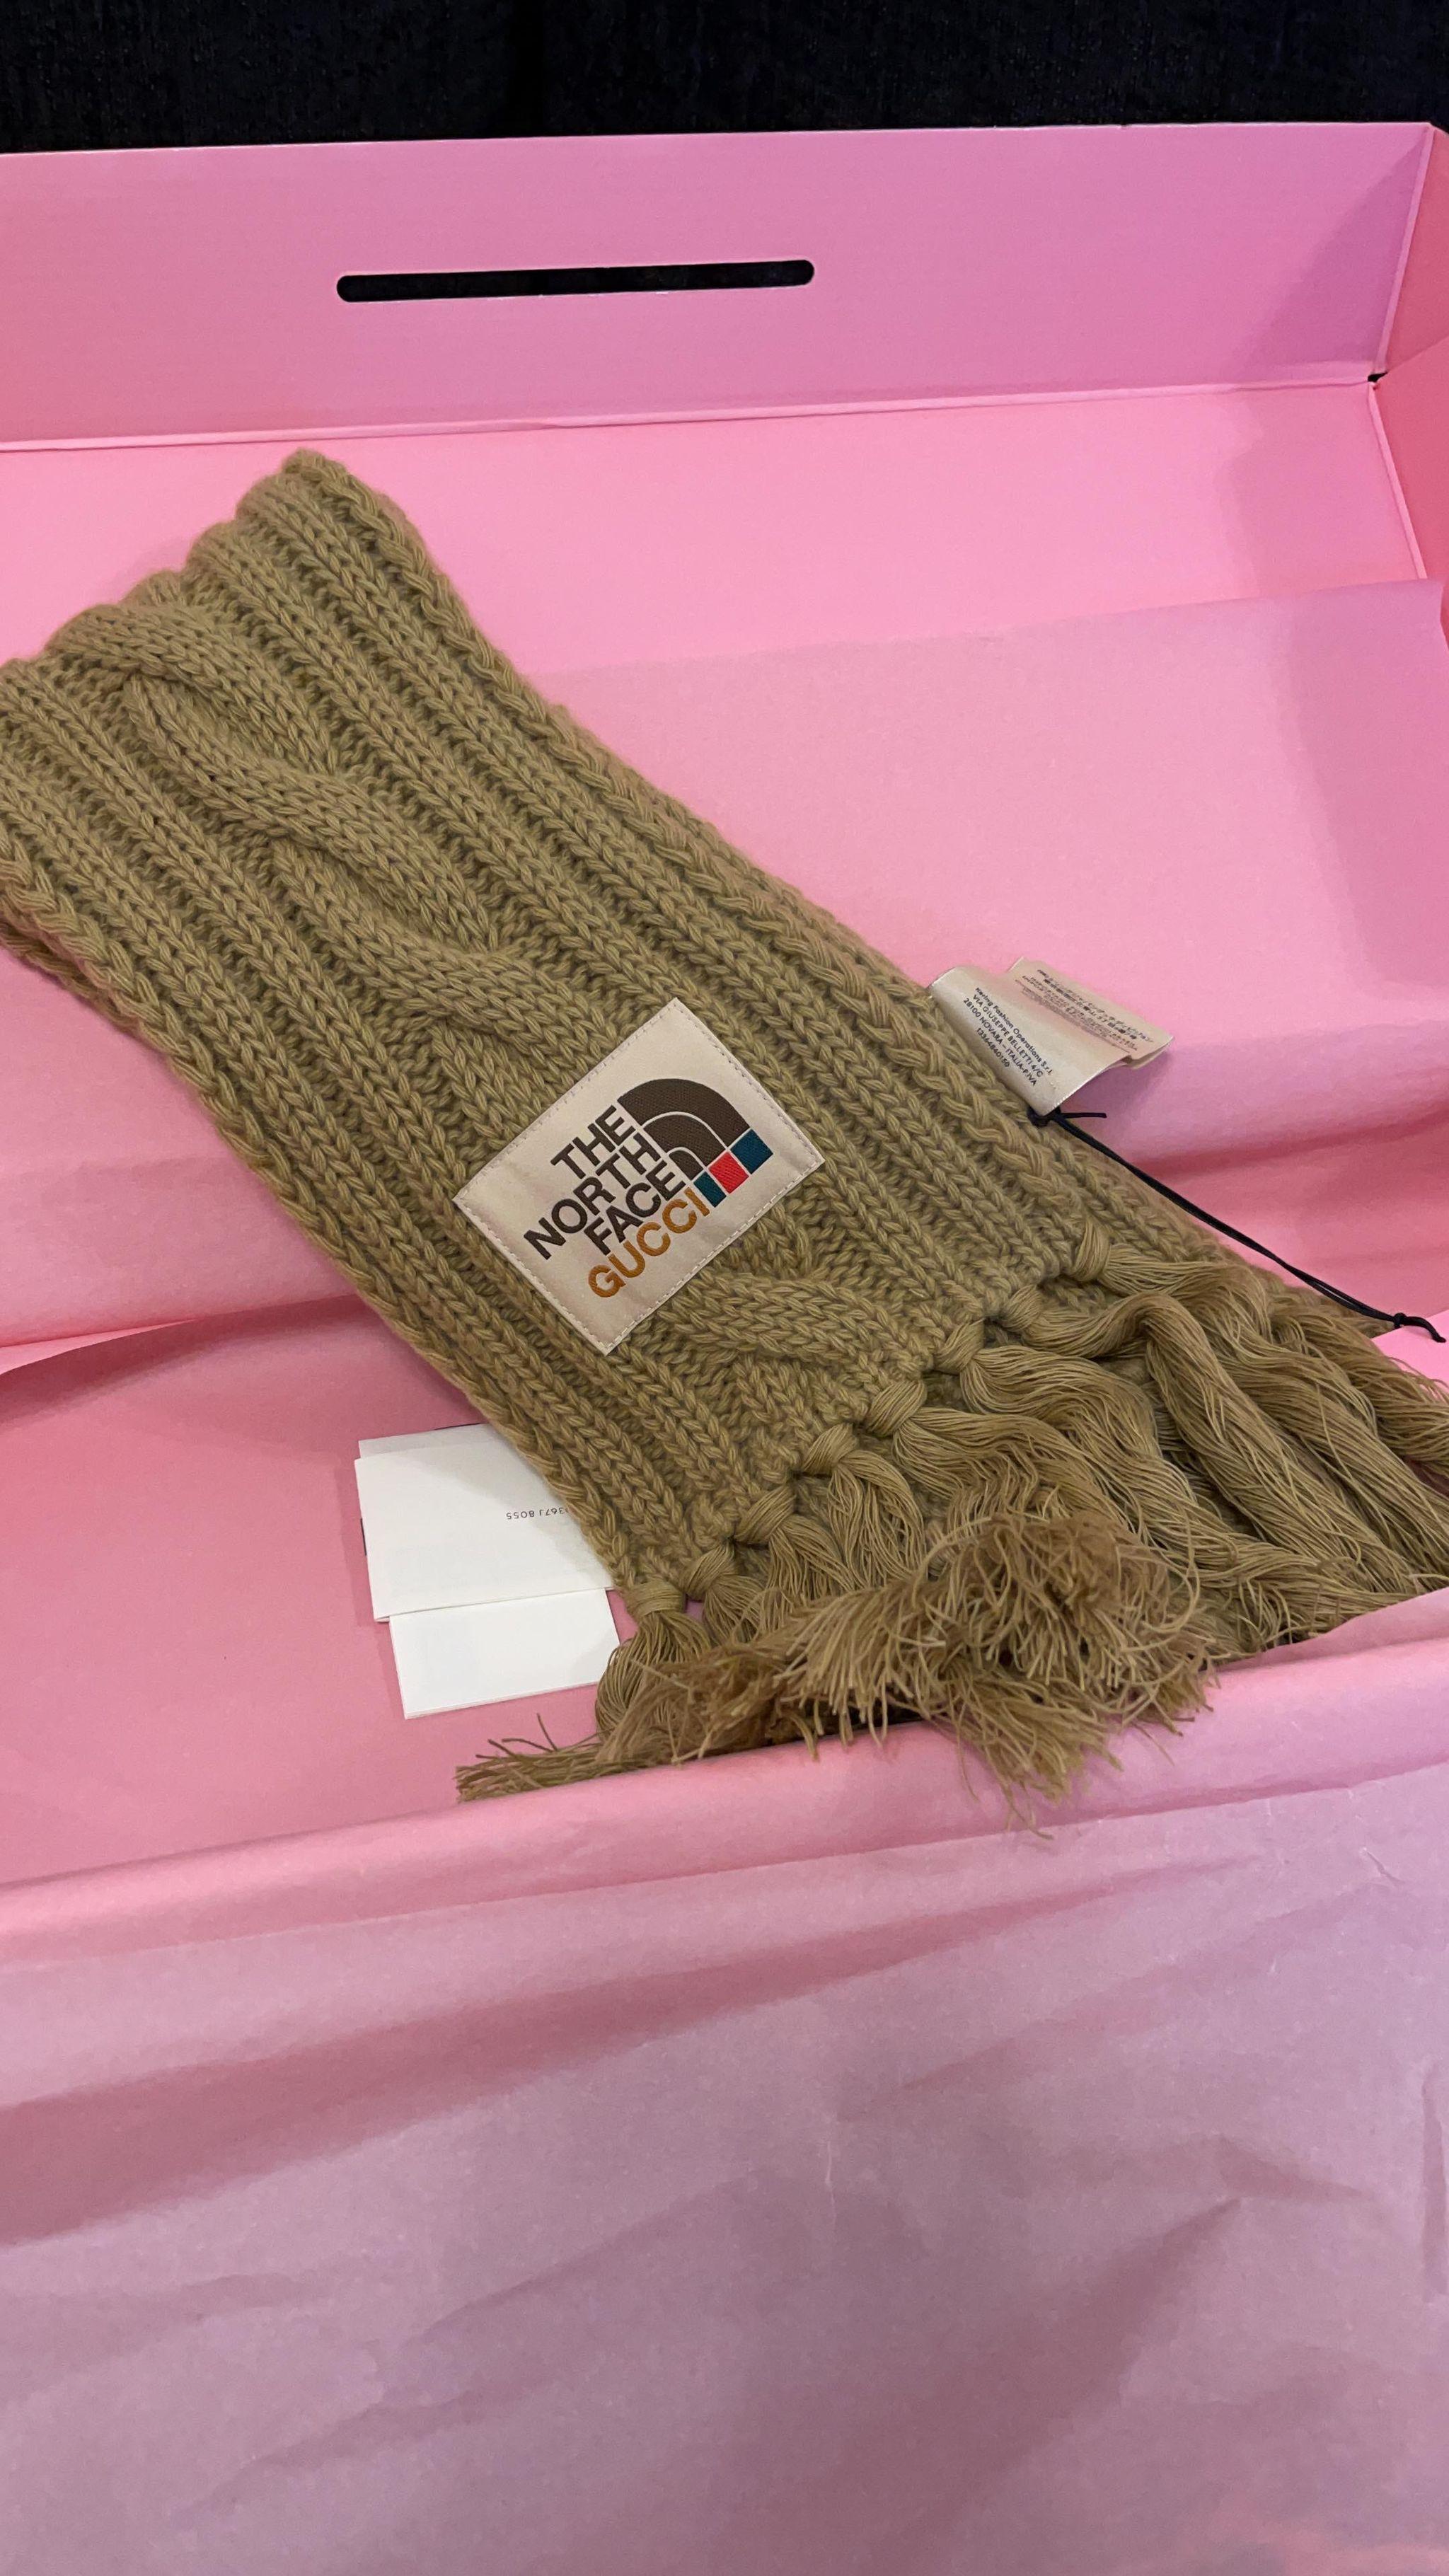 Part of The North Face X Gucci Collaboration, this wool scarf is available in beige. Sold out and is a collectors item.

Brand New and includes the Pink Gucci x North Face special box. 